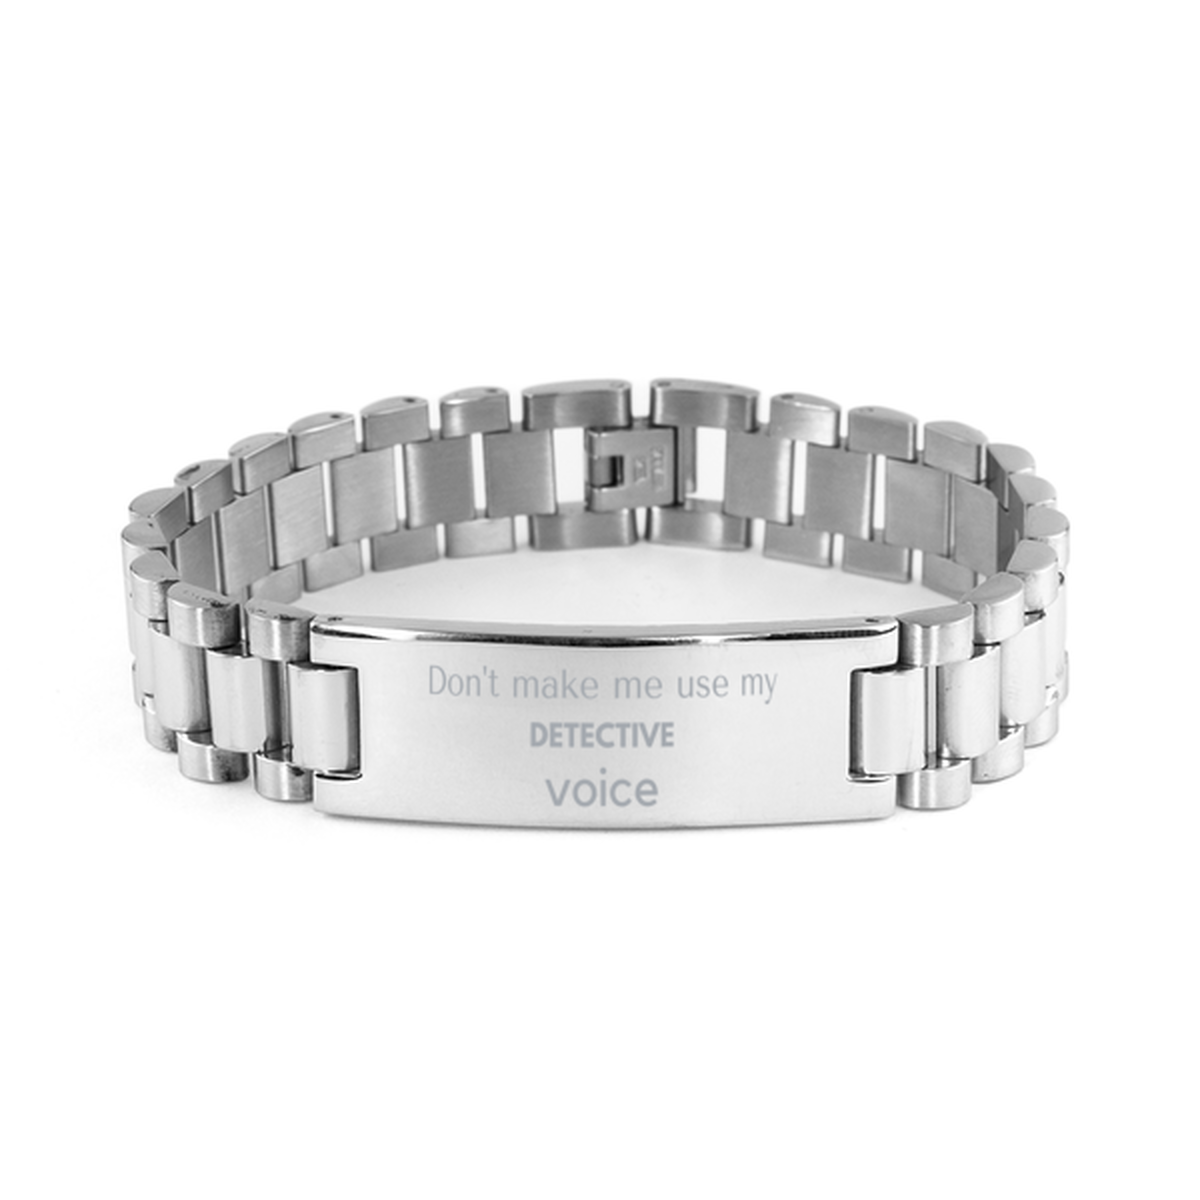 Don't make me use my Detective voice, Sarcasm Detective Gifts, Christmas Detective Ladder Stainless Steel Bracelet Birthday Unique Gifts For Detective Coworkers, Men, Women, Colleague, Friends